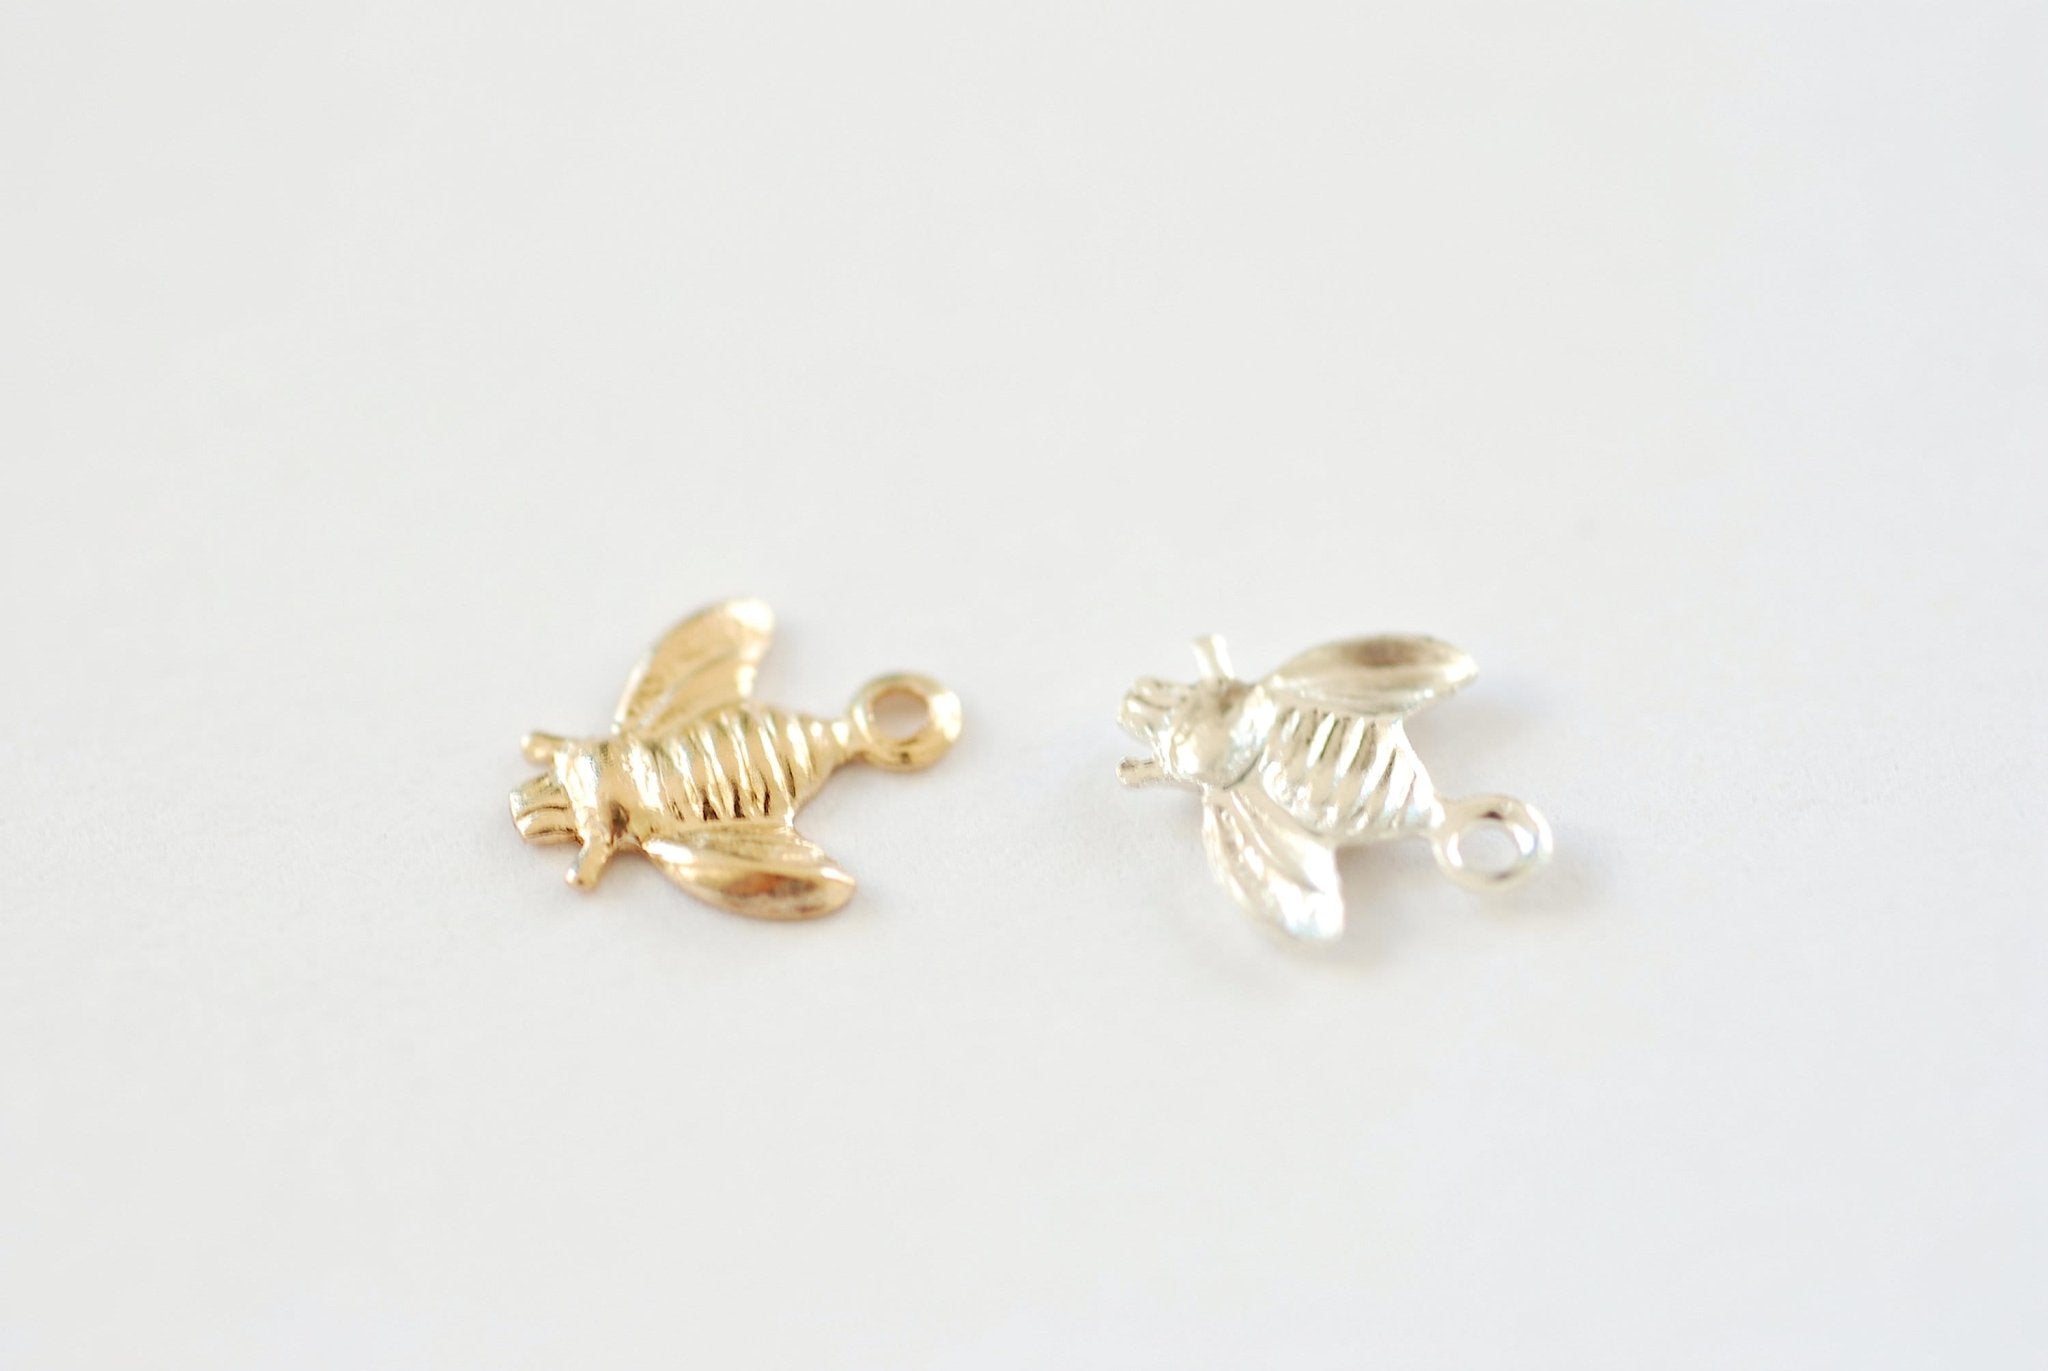 Wholesale Gold Filled Sterling Silver Bee Charm l Permanent Jewelry Bee Insect Drop Charm l Animal Insect Bug Charm - HarperCrown